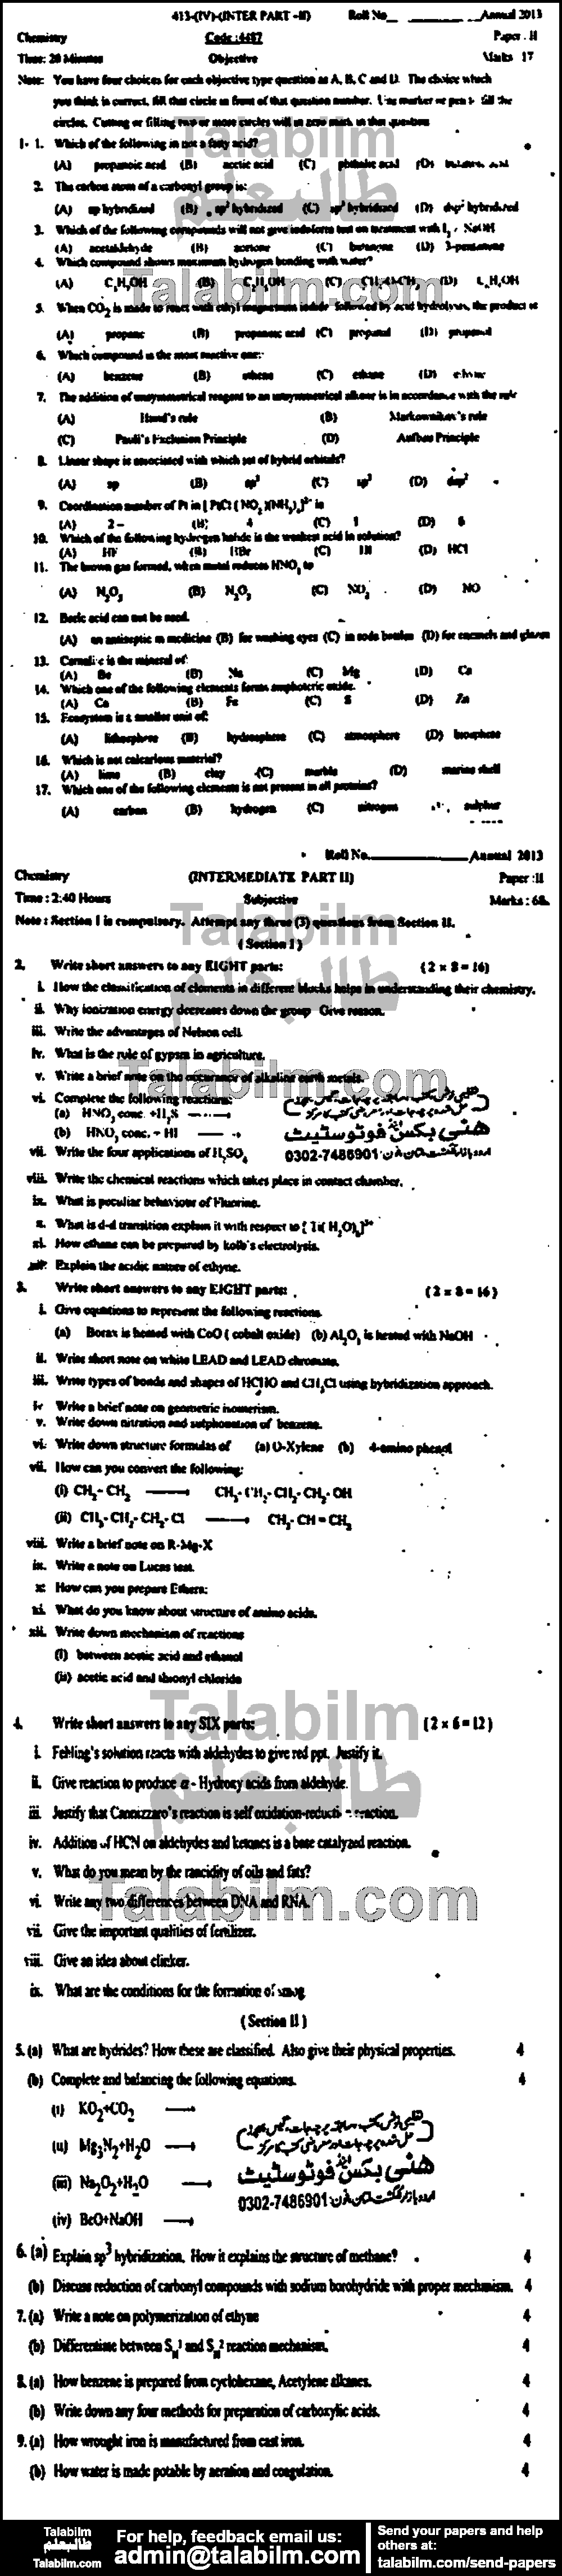 Chemistry 0 past paper for Group-II 2013